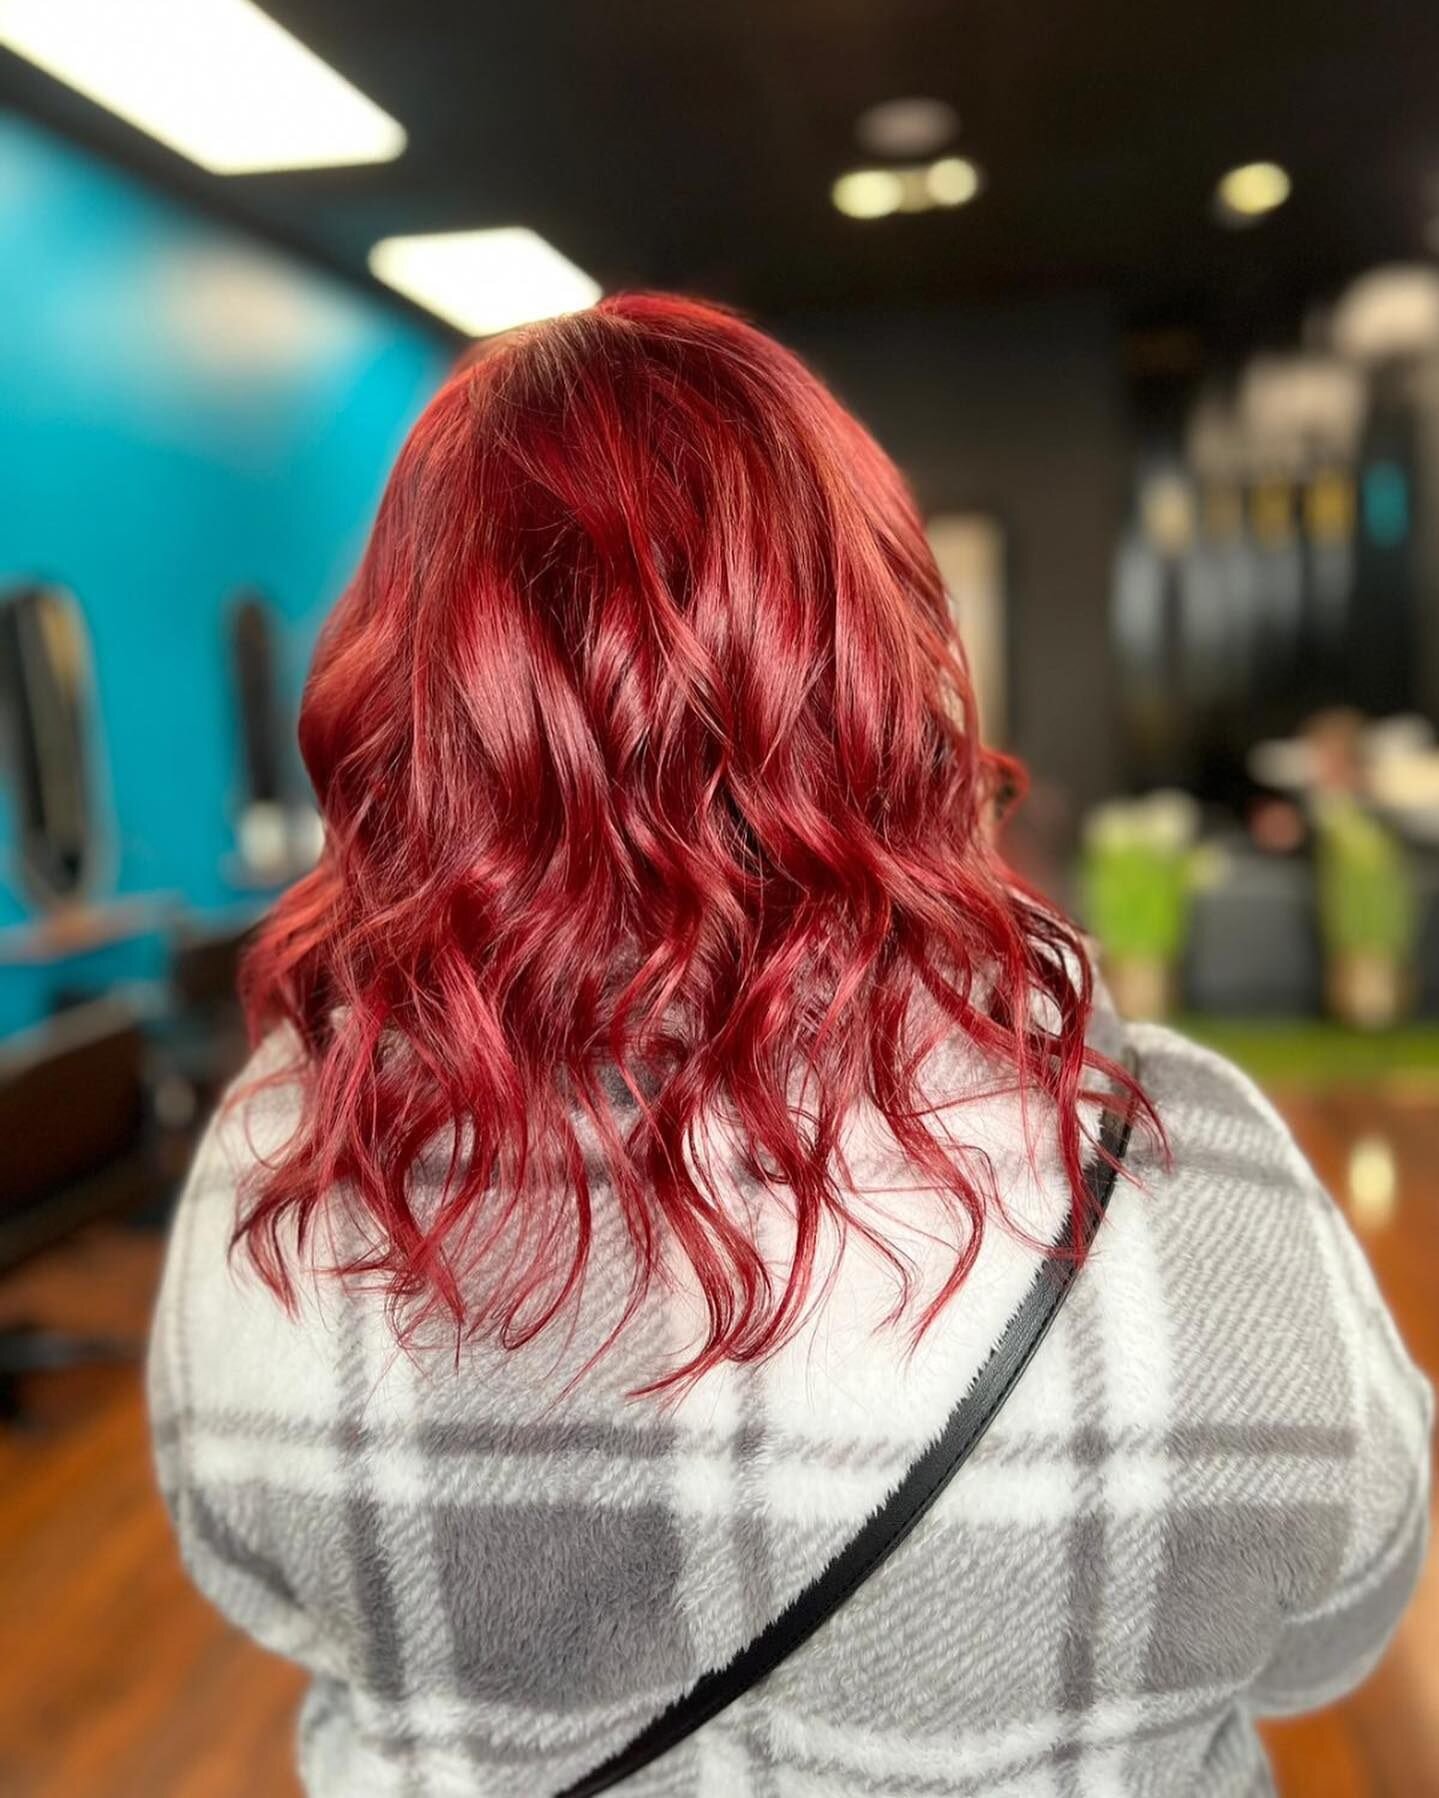 Looking for the perfect place to elevate your hair game? Look no further than @salonmieuxparkway! Your go-to destination for all things hair!

🌟 Their expert team is ready to work their magic and bring your hair dreams to life. Open seven days a wee